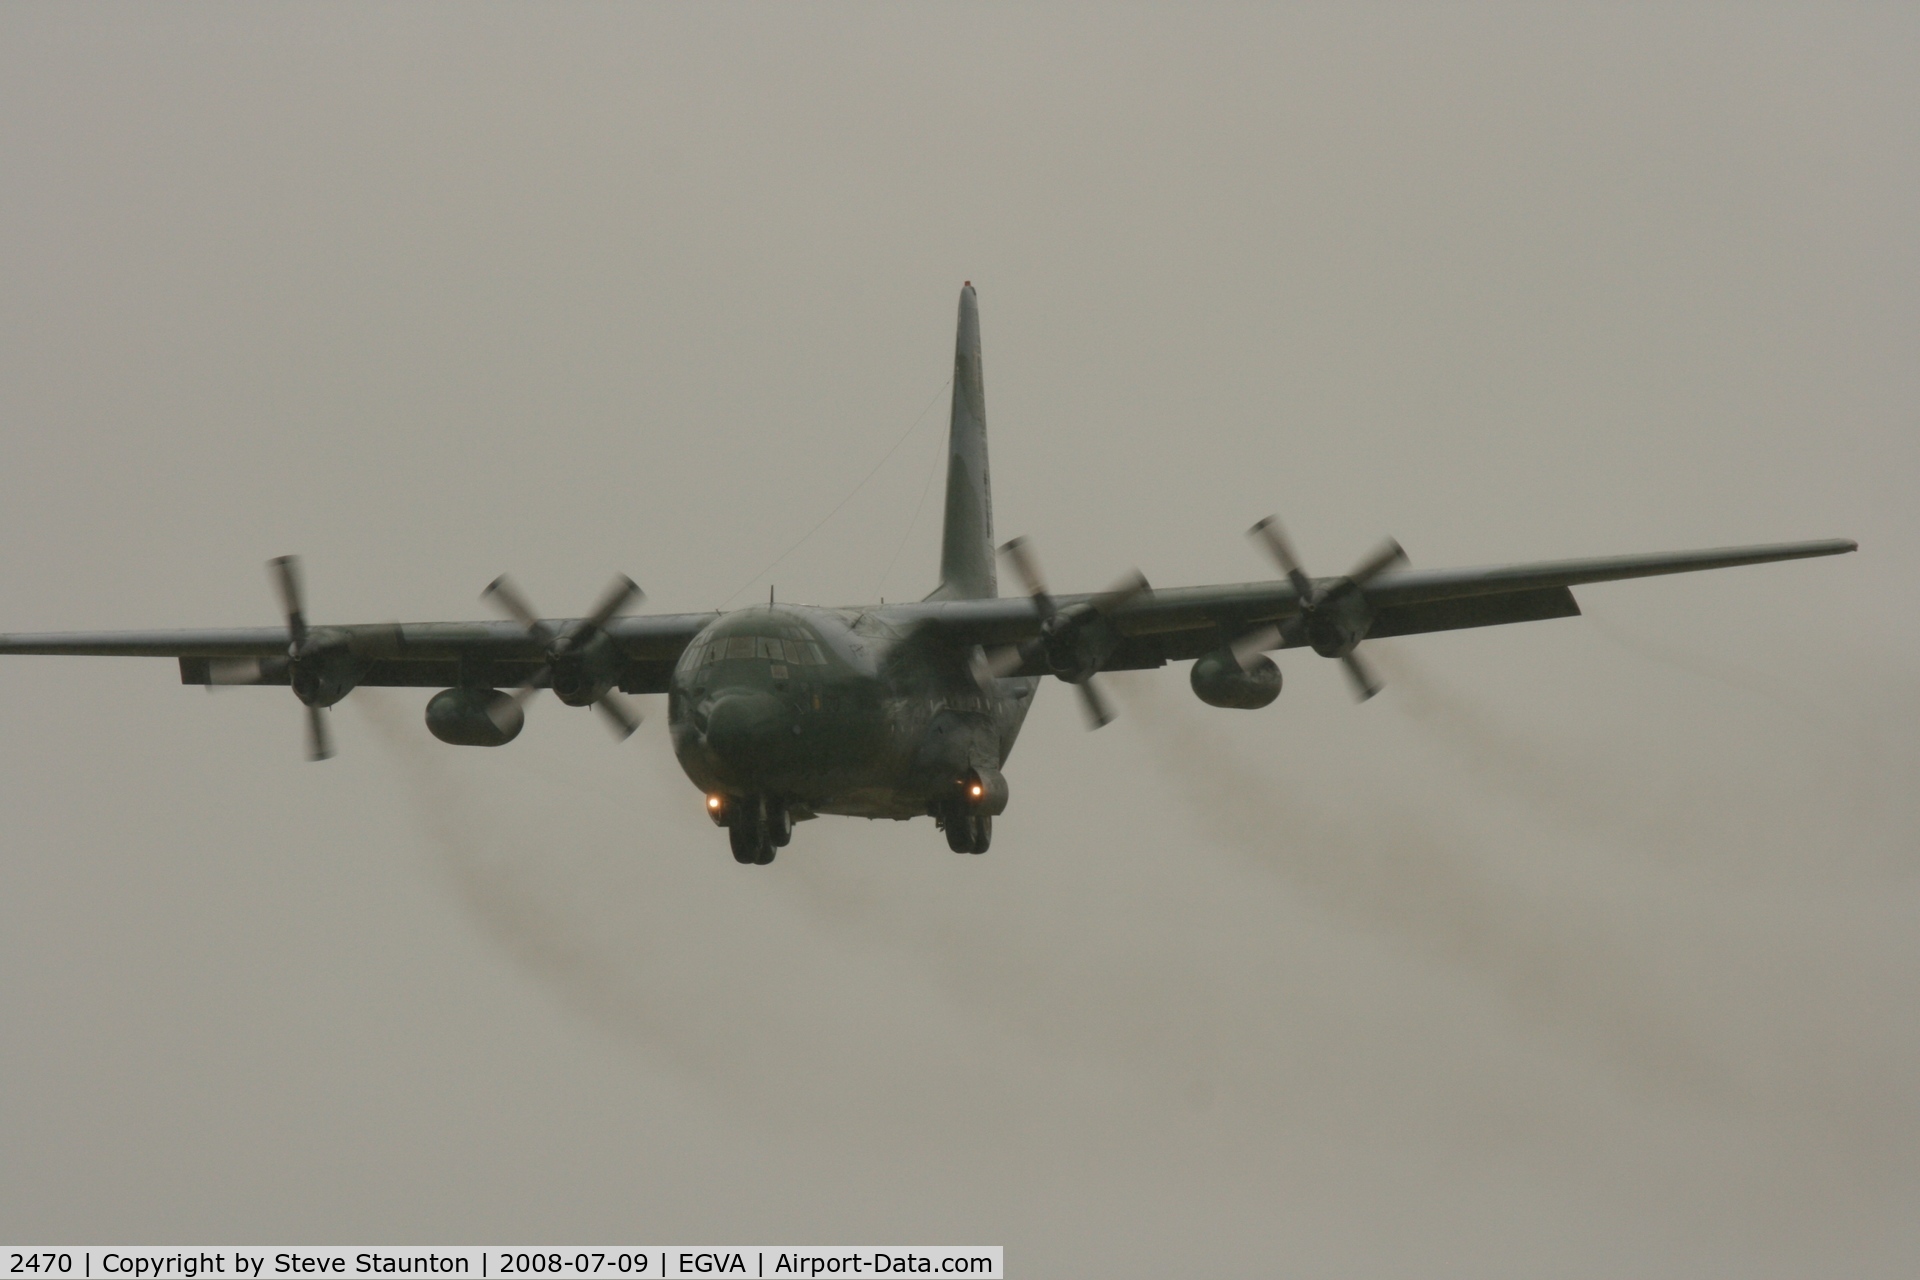 2470, 1971 Lockheed C-130H Hercules C/N 382-4441, Taken at the Royal International Air Tattoo 2008 during arrivals and departures (show days cancelled due to bad weather)